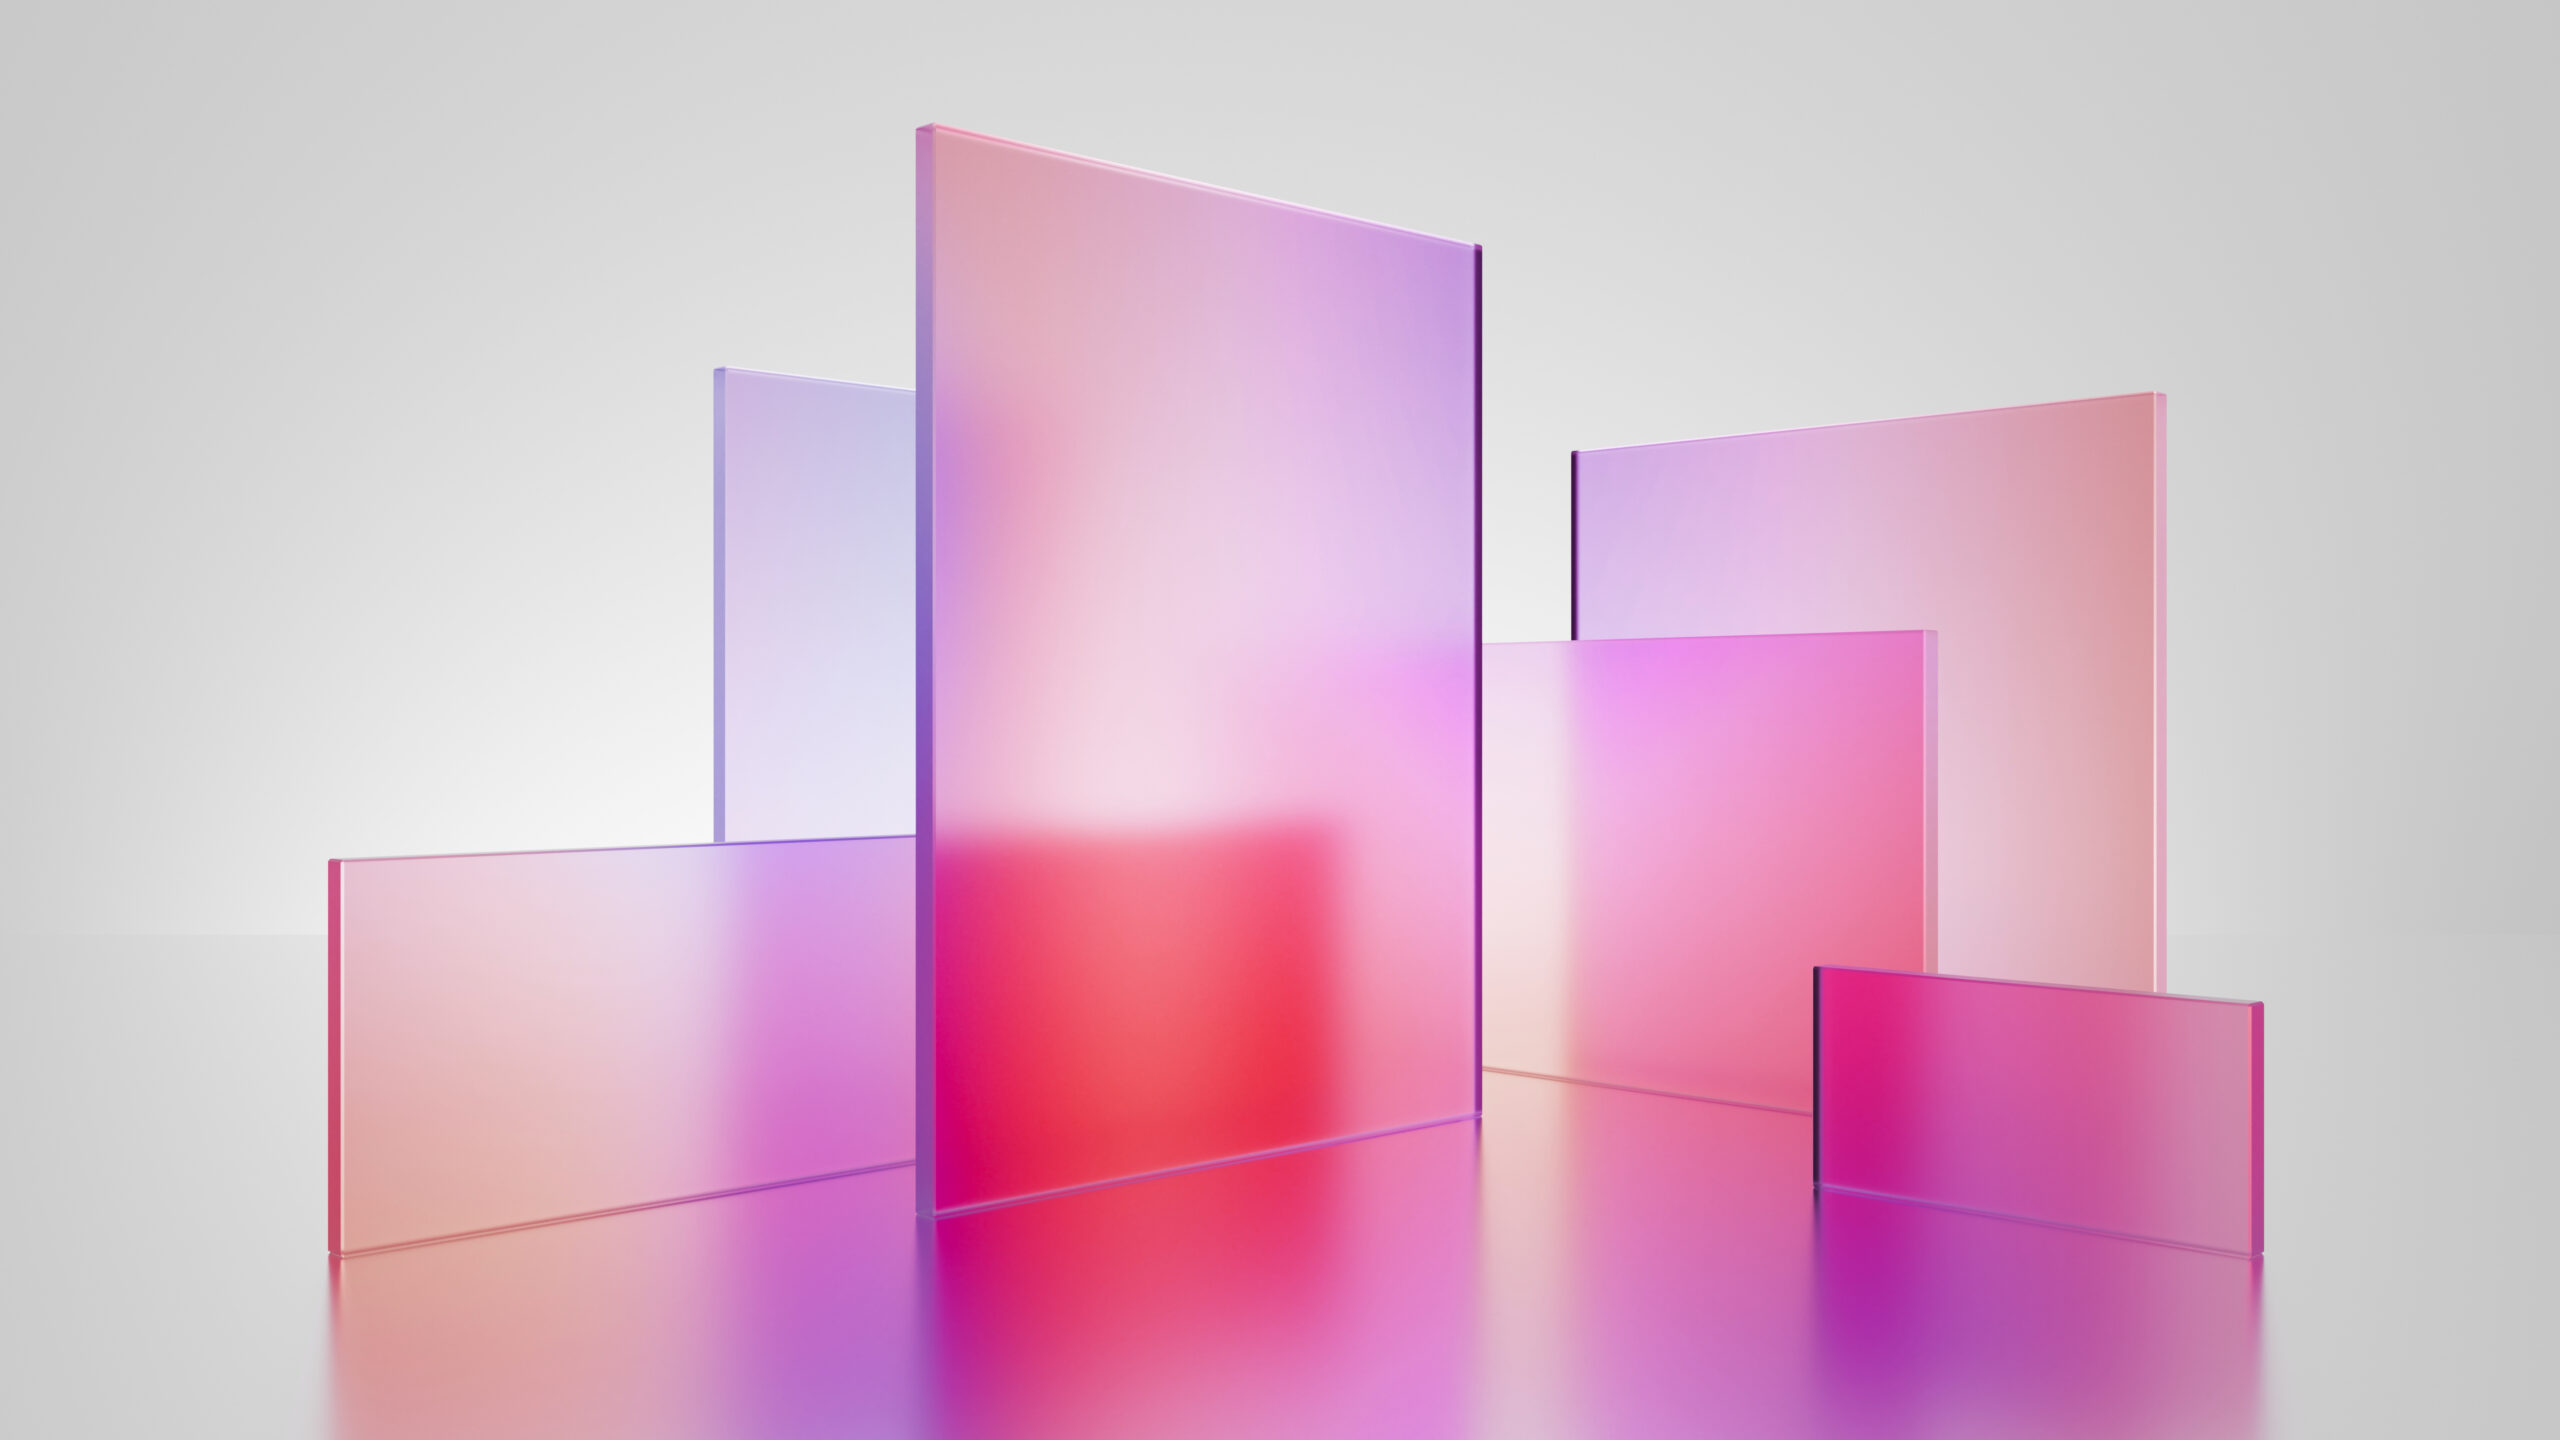 Graphic with translucent tiles in pink red violet gradient, simple square shapes representing the Learn content